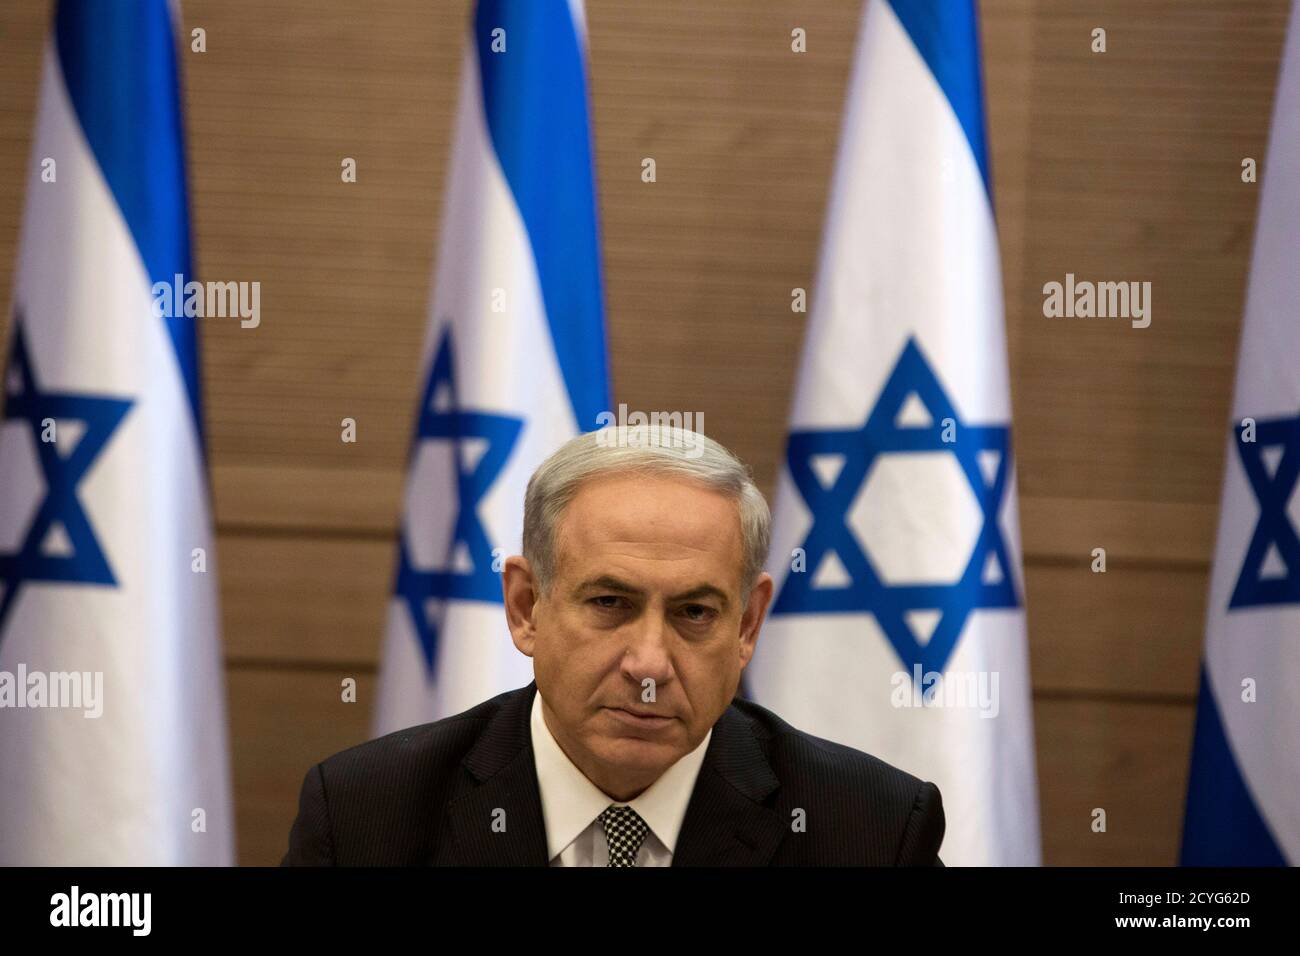 Israel's Prime Minister Benjamin Netanyahu heads a cabinet meeting in Jerusalem July 24, 2014. Israel won a partial reprieve from the economic pain of its Gaza war on Thursday with the lifting of a U.S. ban on commercial flights to Tel Aviv, as fighting pushed the Palestinian death toll over 700. A truce remained elusive despite intensive mediation bids. Israel says it needs more time to eradicate cross-border tunnels used by Hamas for attacks, while the Palestinian Islamists demand the blockade on the Gaza Strip be lifted. REUTERS/Siegfried Modola     (JERUSALEM - Tags: POLITICS CONFLICT) Stock Photo